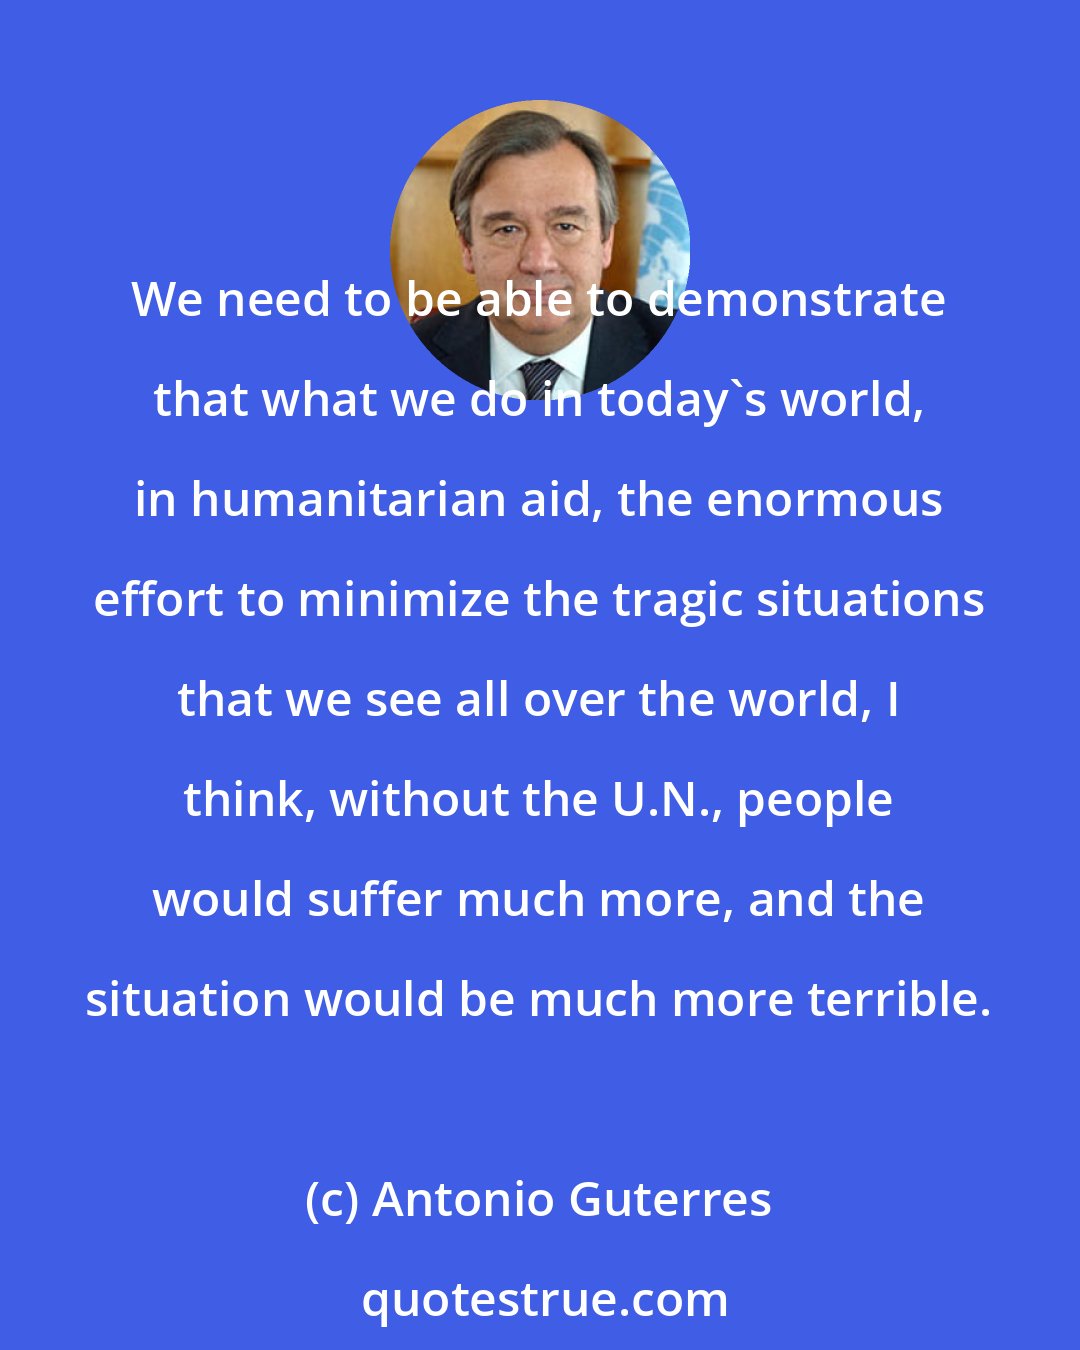 Antonio Guterres: We need to be able to demonstrate that what we do in today's world, in humanitarian aid, the enormous effort to minimize the tragic situations that we see all over the world, I think, without the U.N., people would suffer much more, and the situation would be much more terrible.